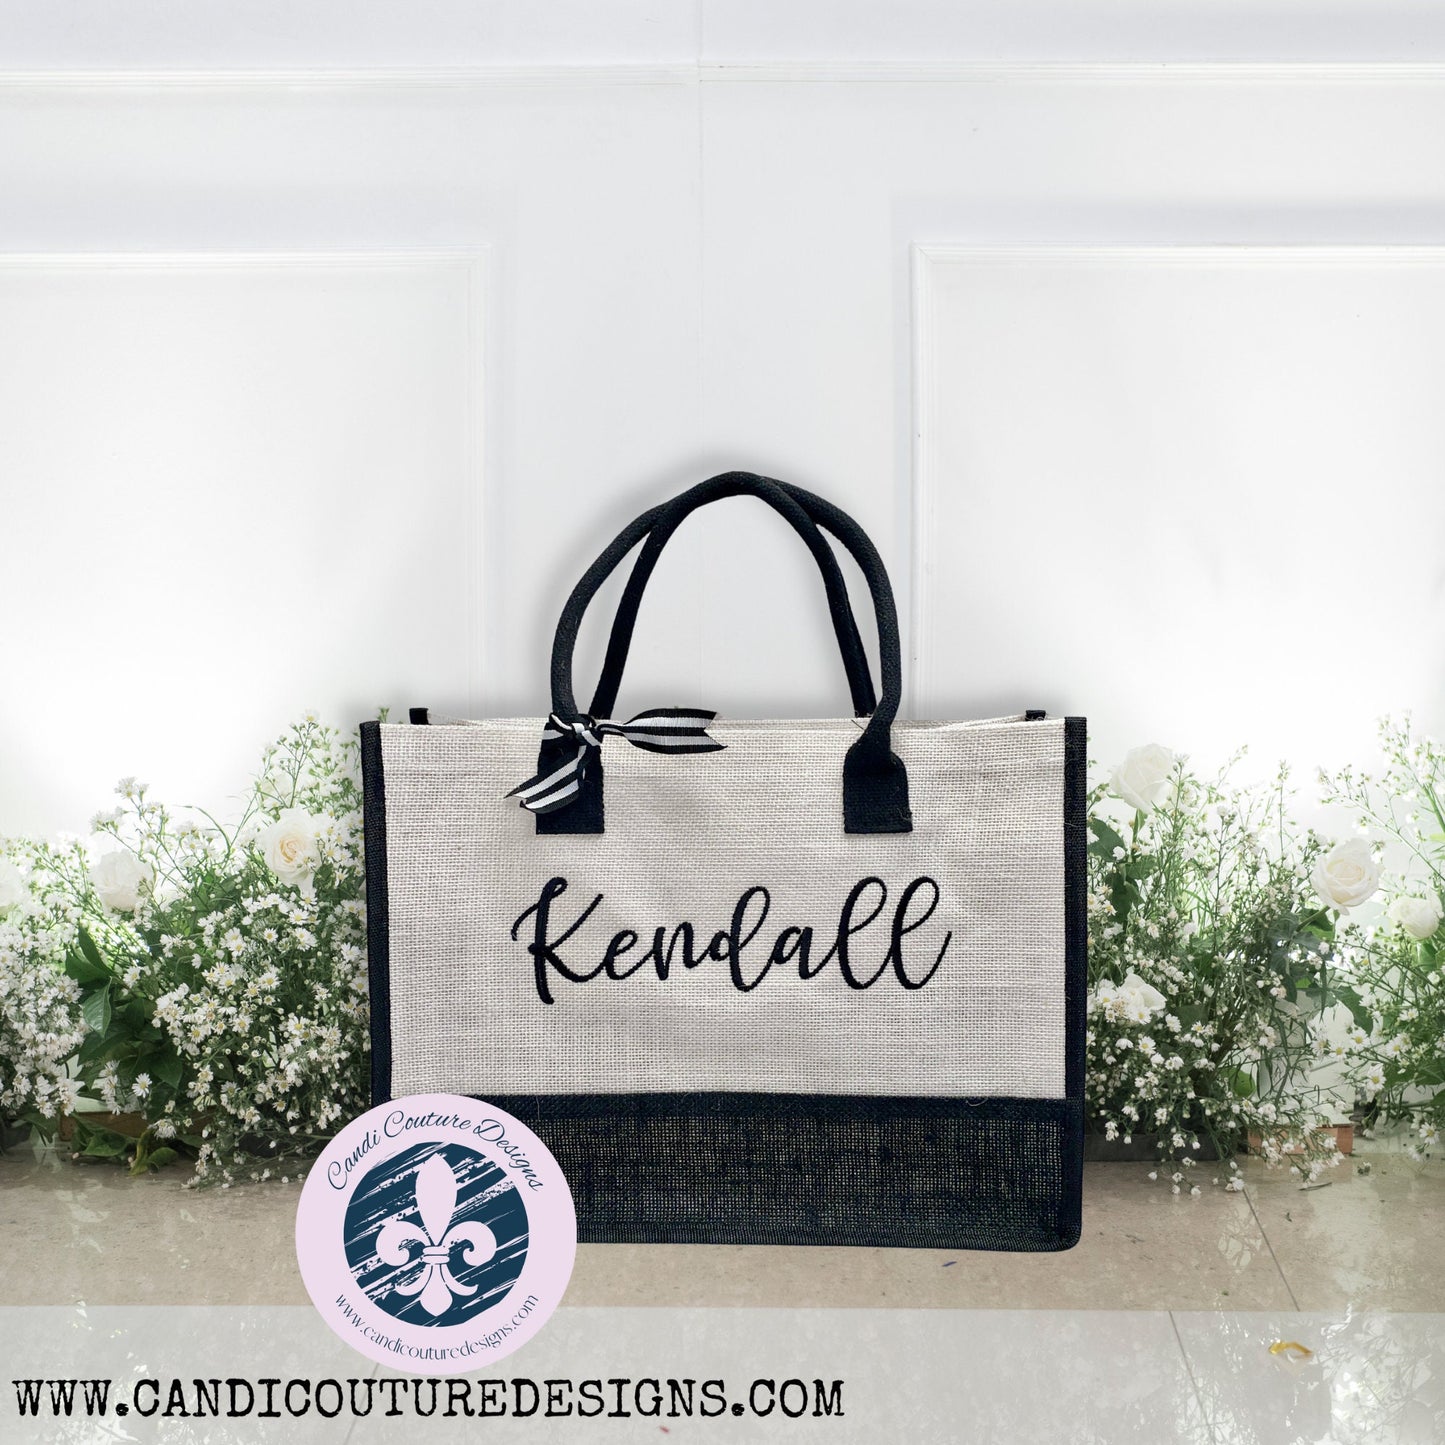 Shop in style with our eco-friendly personalized monogrammed burlap tote bag for women. This customizable fashion accessory is perfect for shopping, the beach, or as a bridesmaid gift. Get yours now and make a statement while being environmentally conscious.